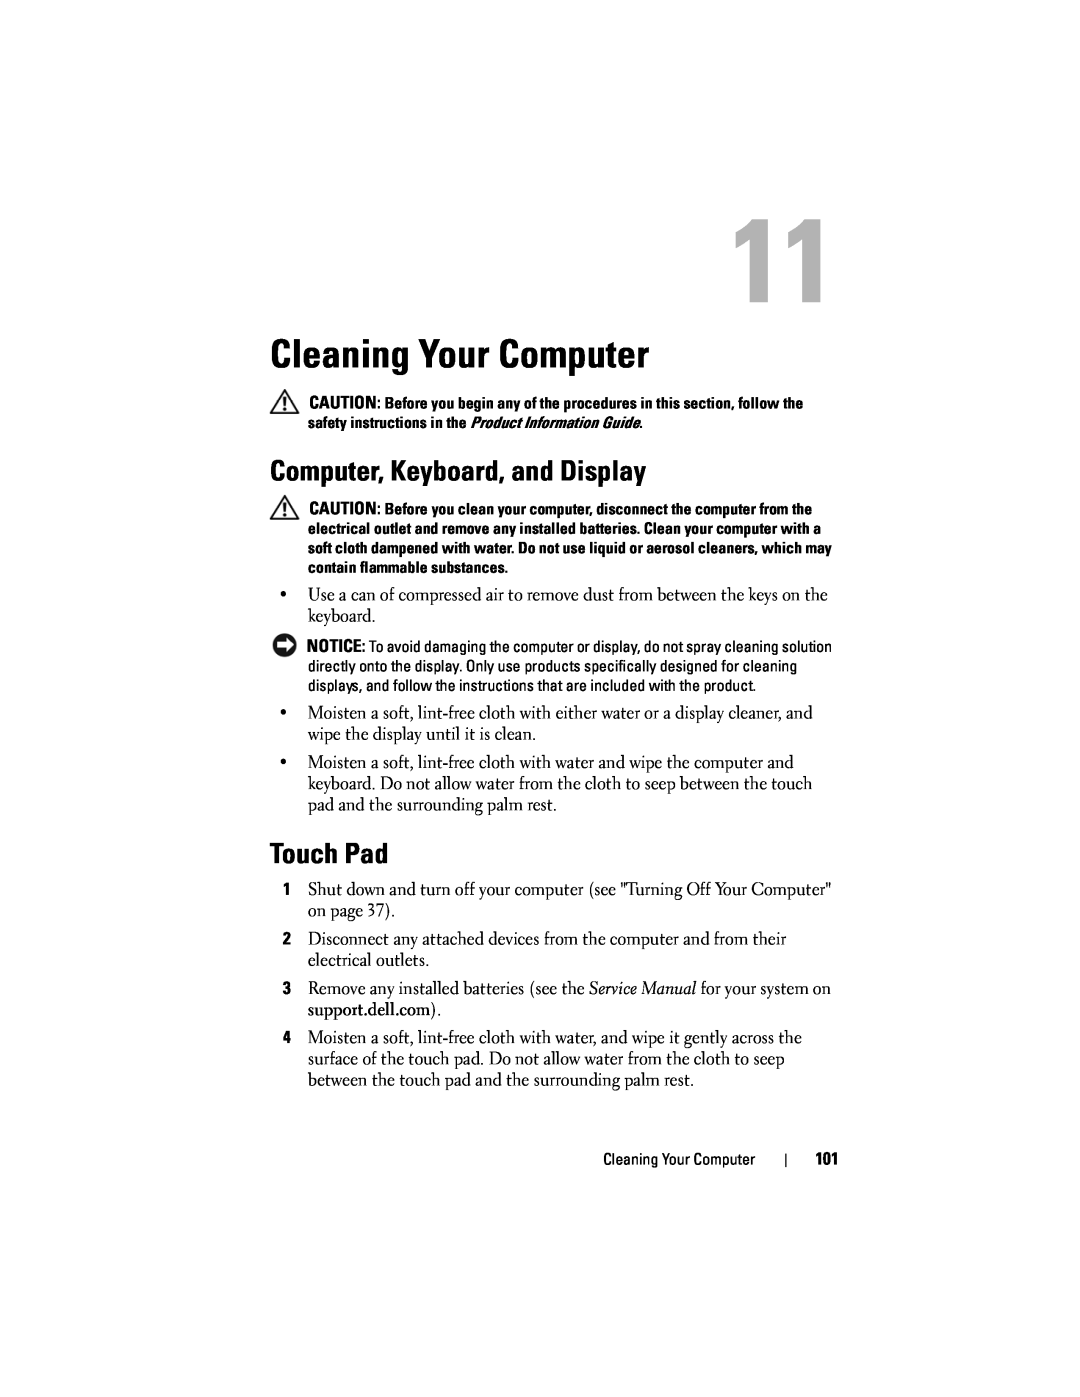 Dell D530 manual Cleaning Your Computer, Computer, Keyboard, and Display, Touch Pad 